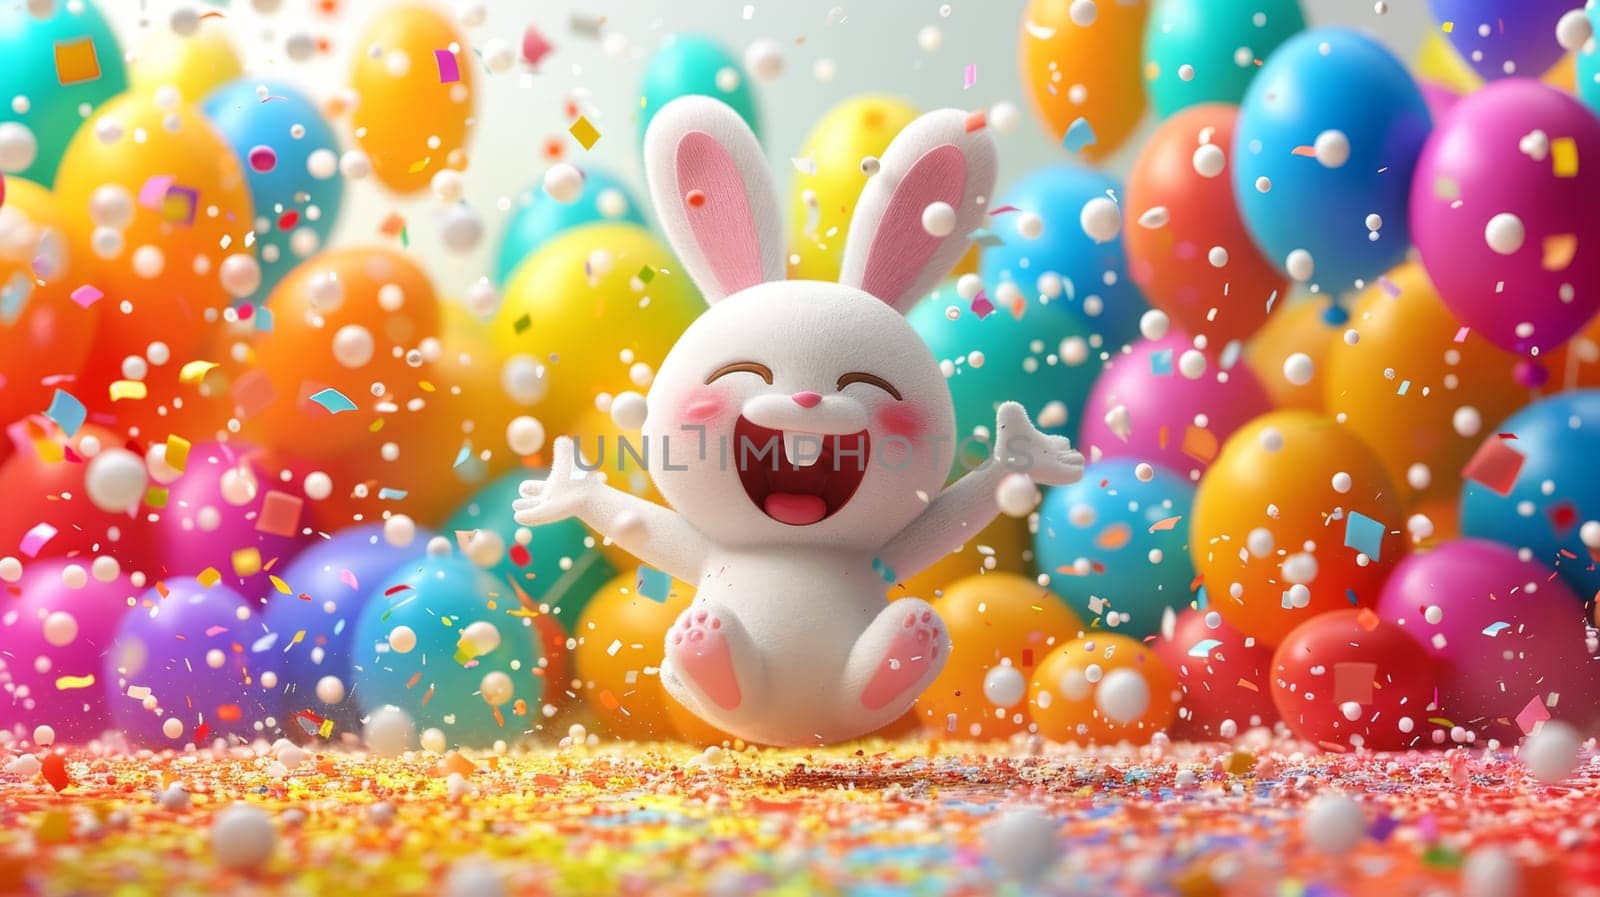 A cheerful cartoon white rabbit is having fun on the background of festive balloons. The concept of the holiday. 3d illustration.